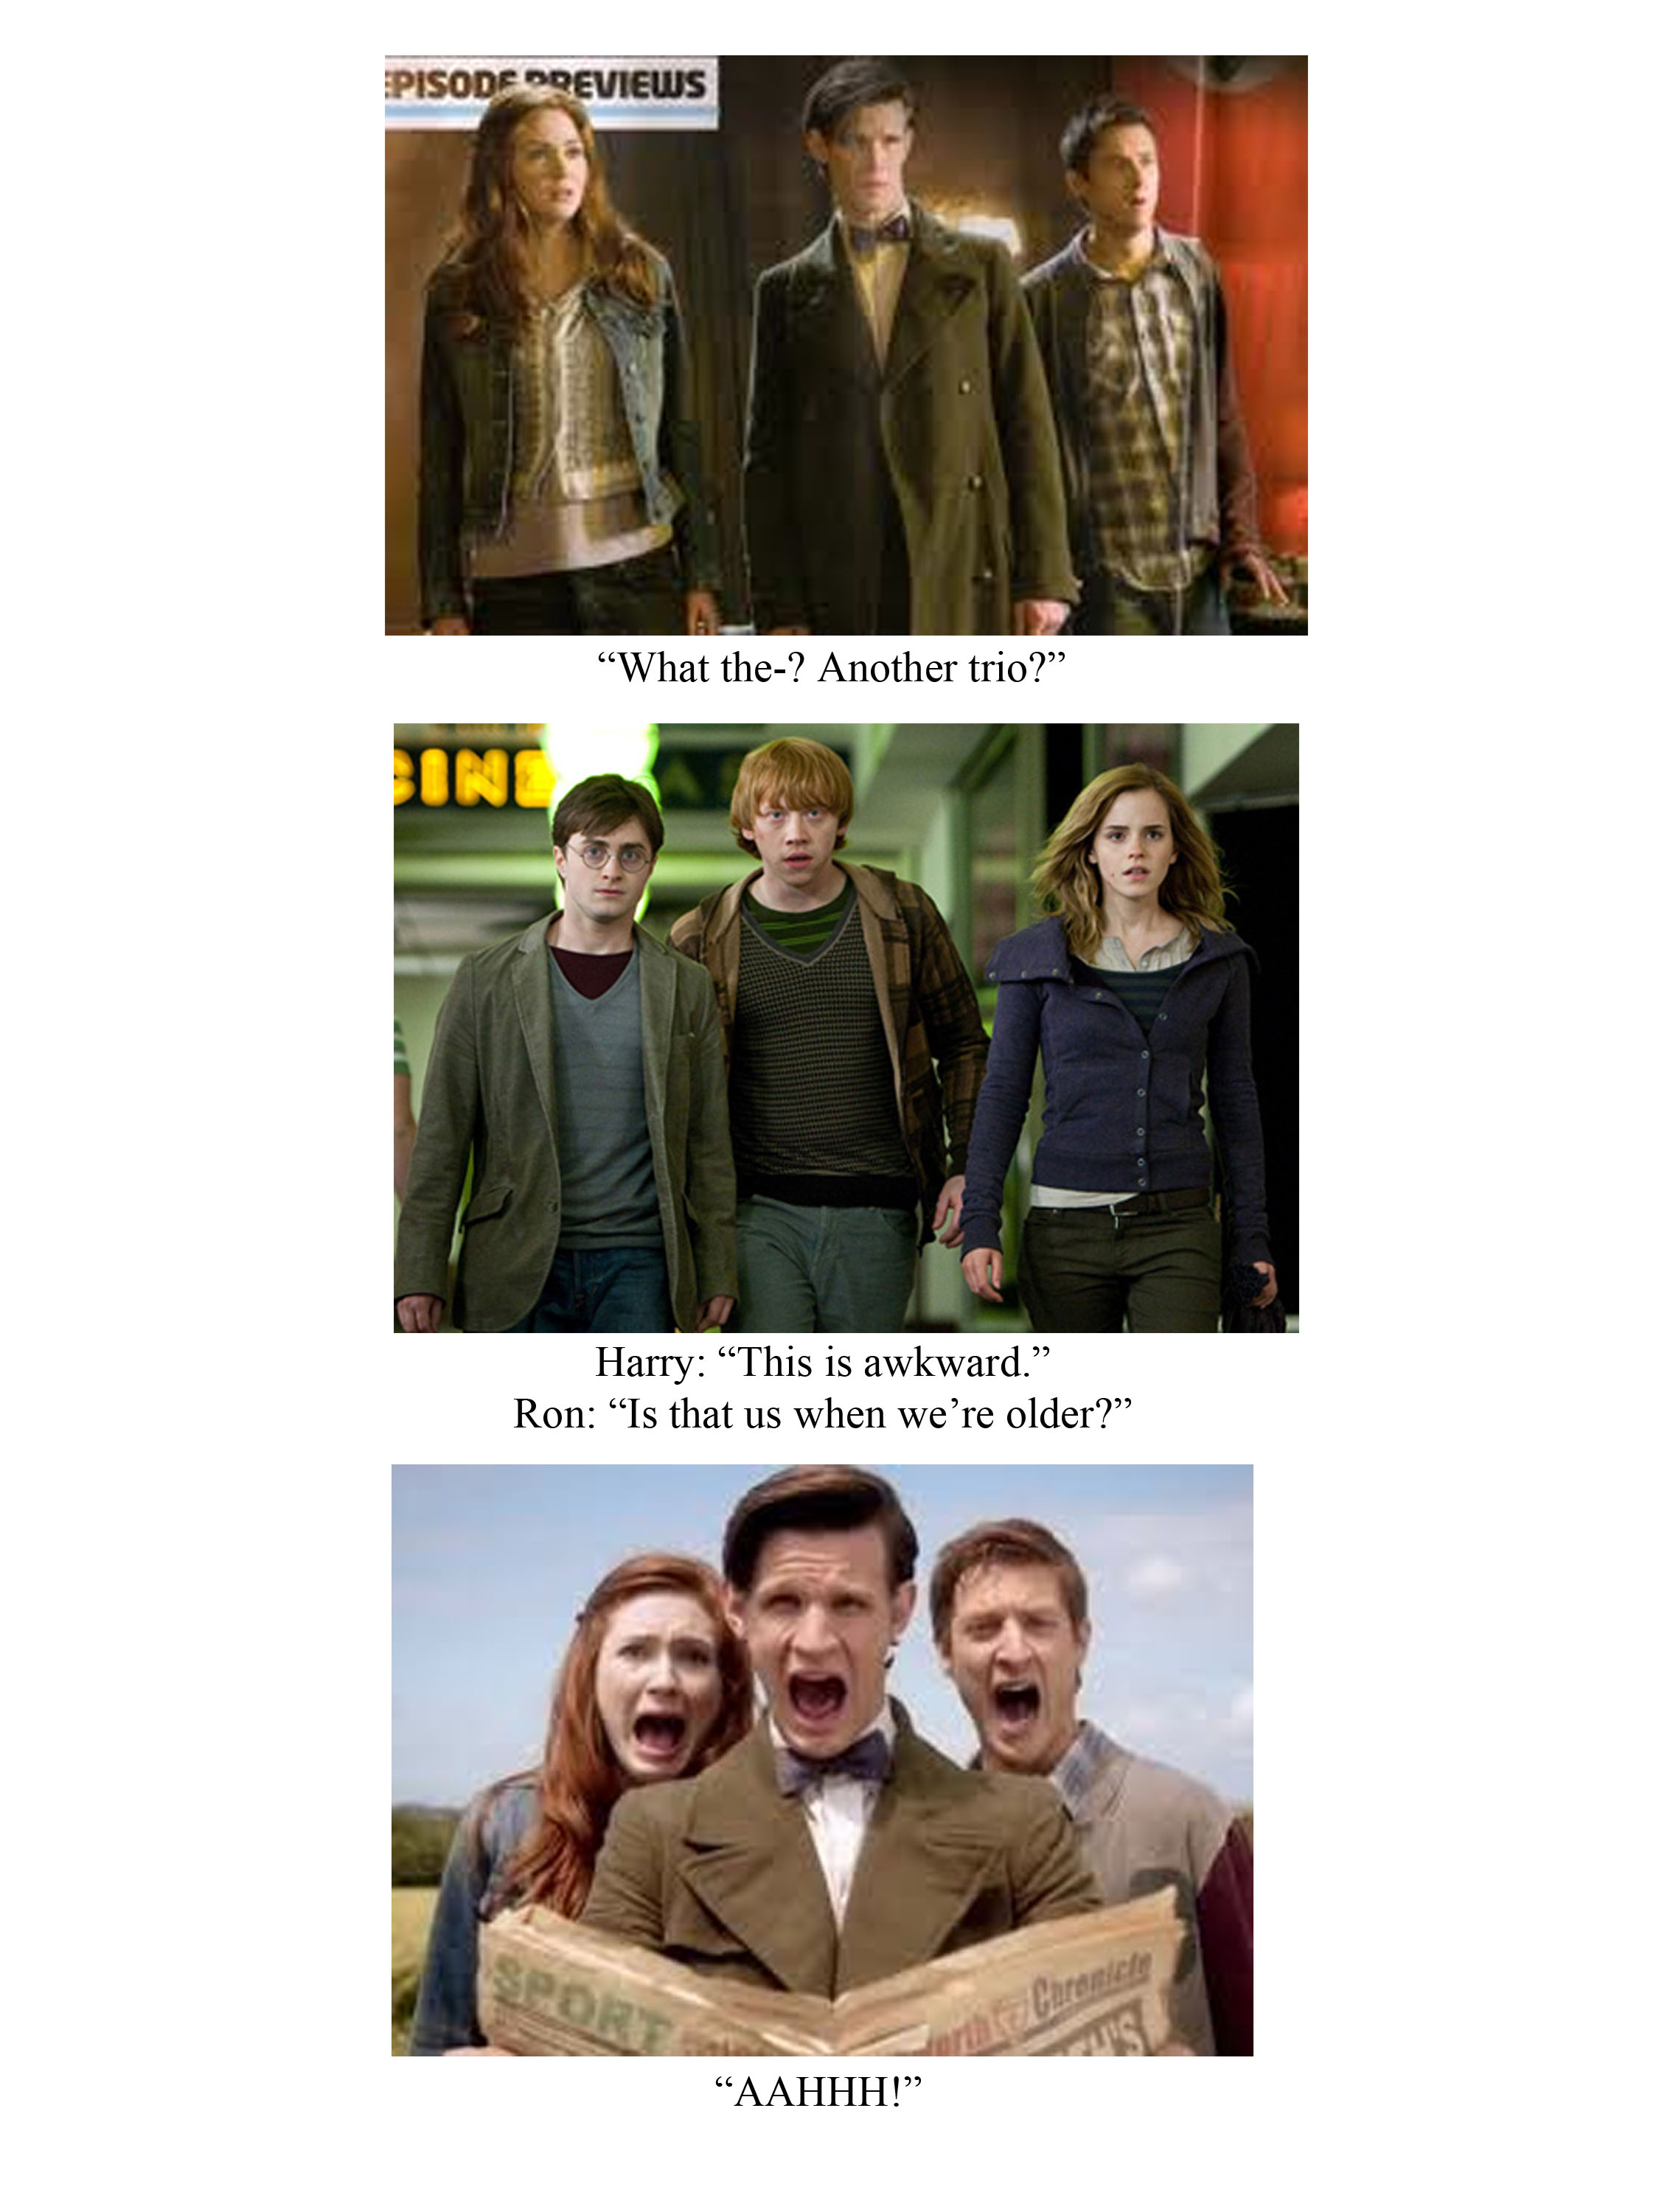 Harry Potter Doctor Who Crossover Memes And Funny Images Fandom